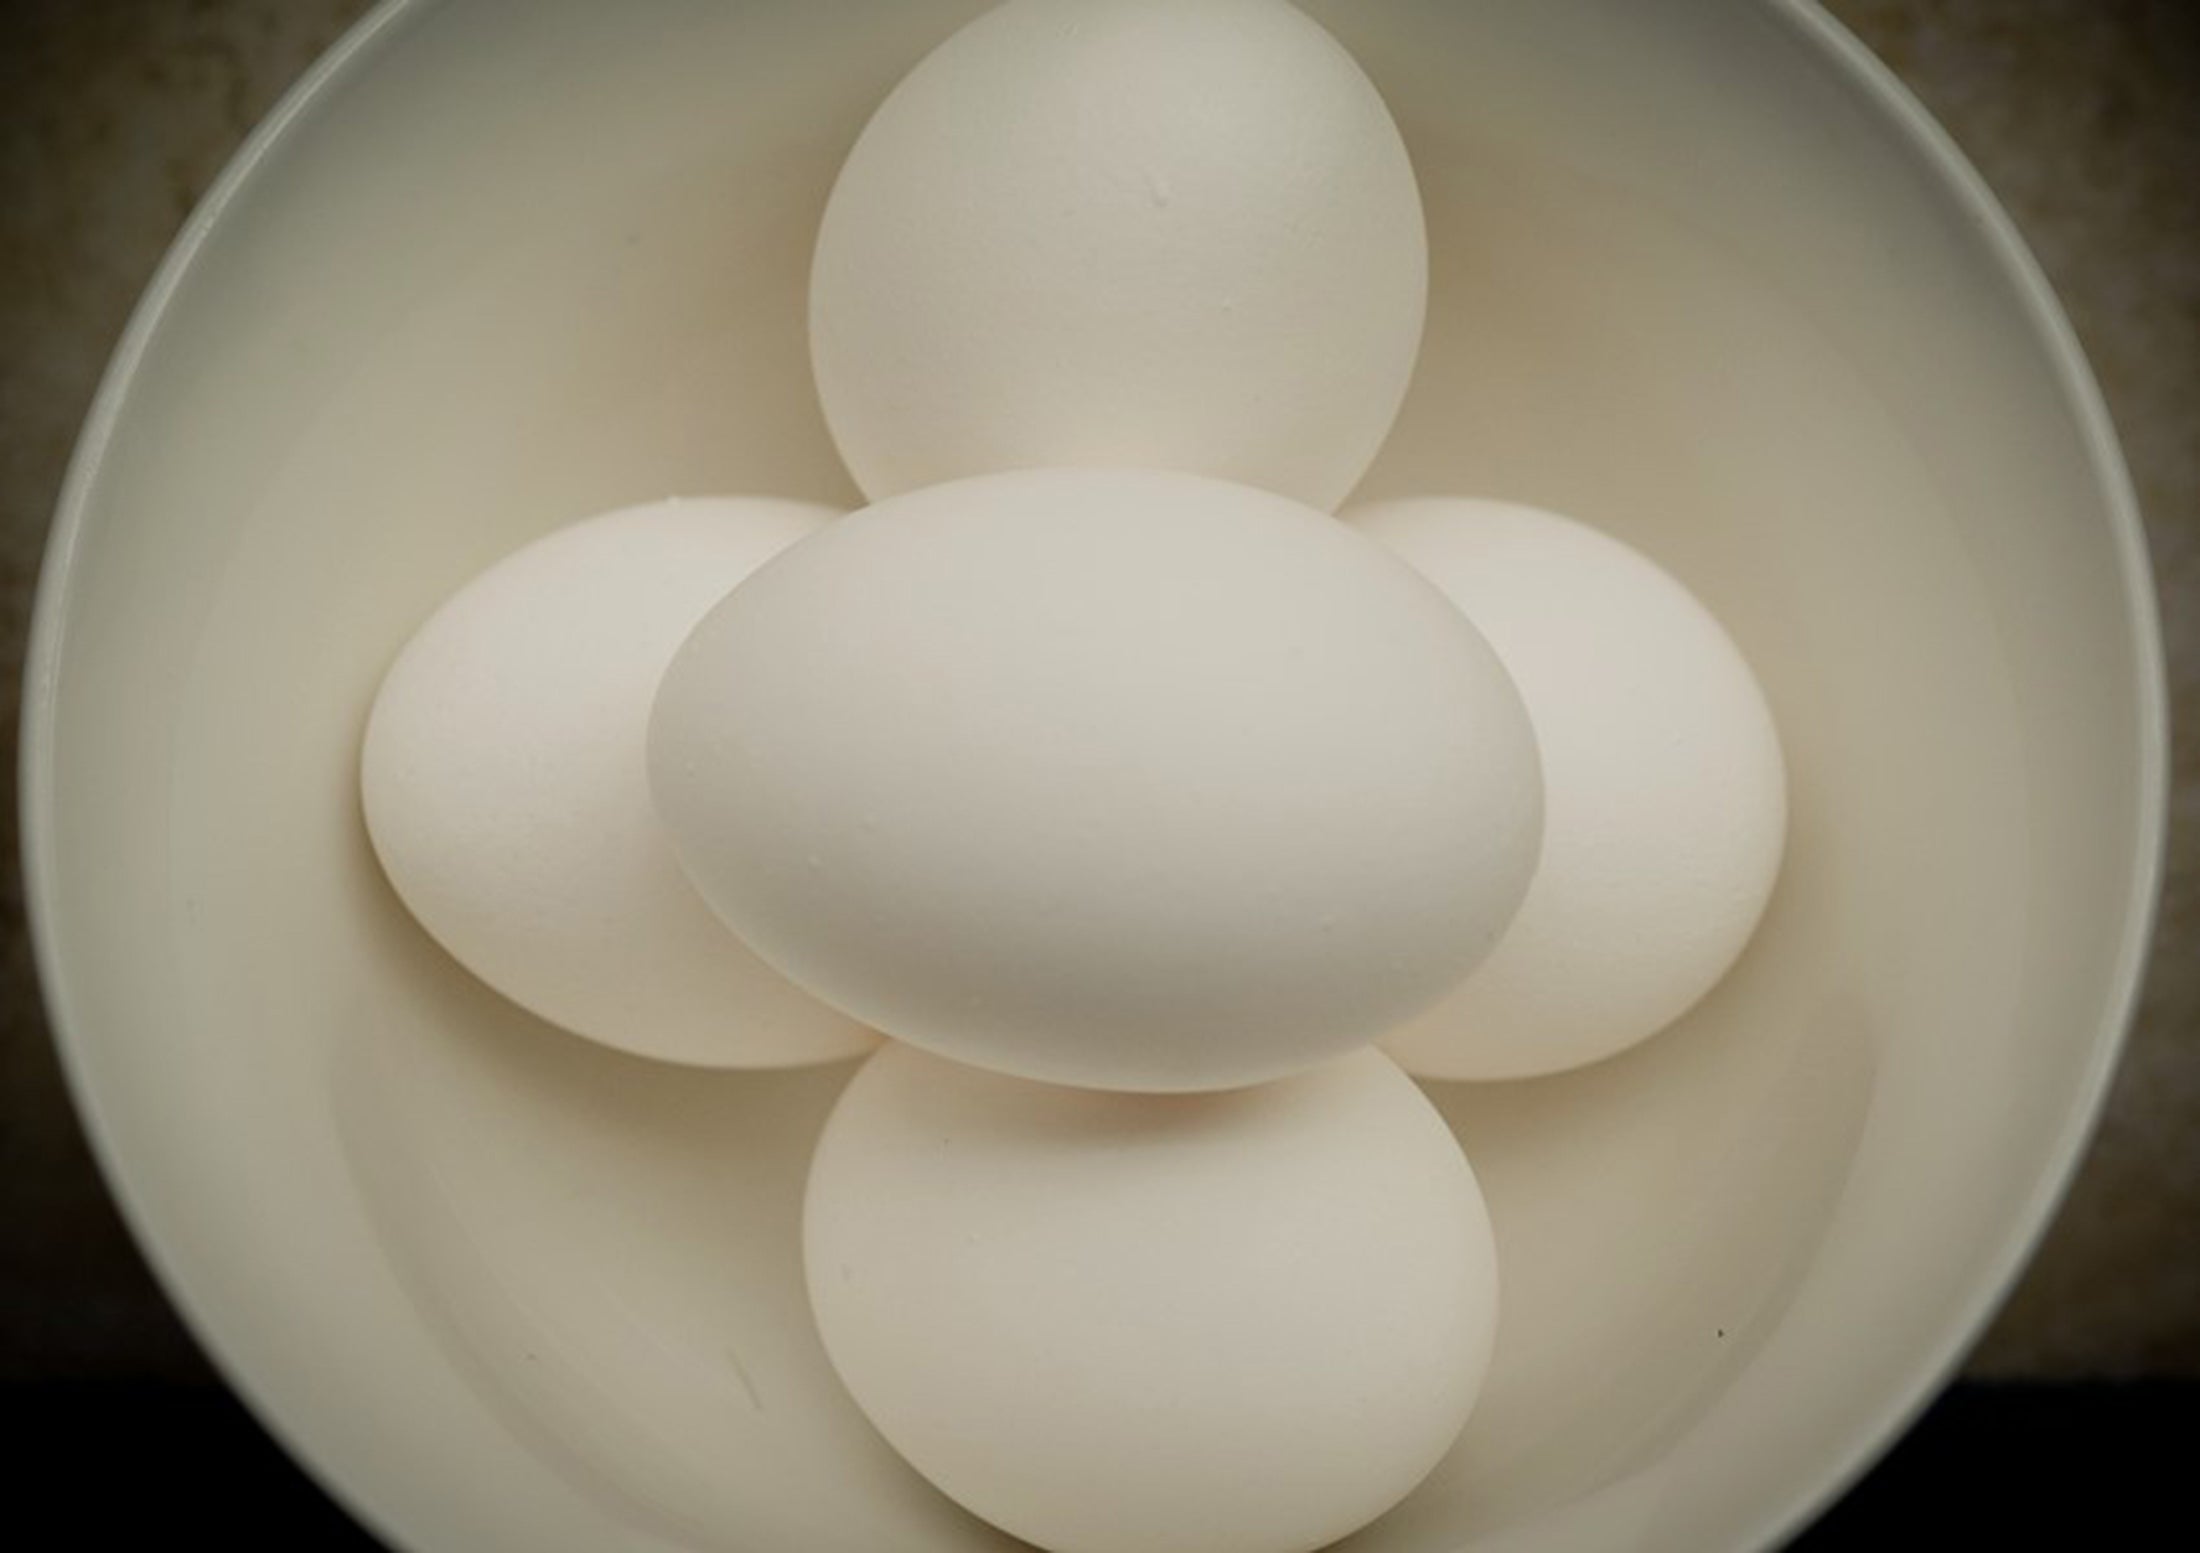 A stack of eggs from above